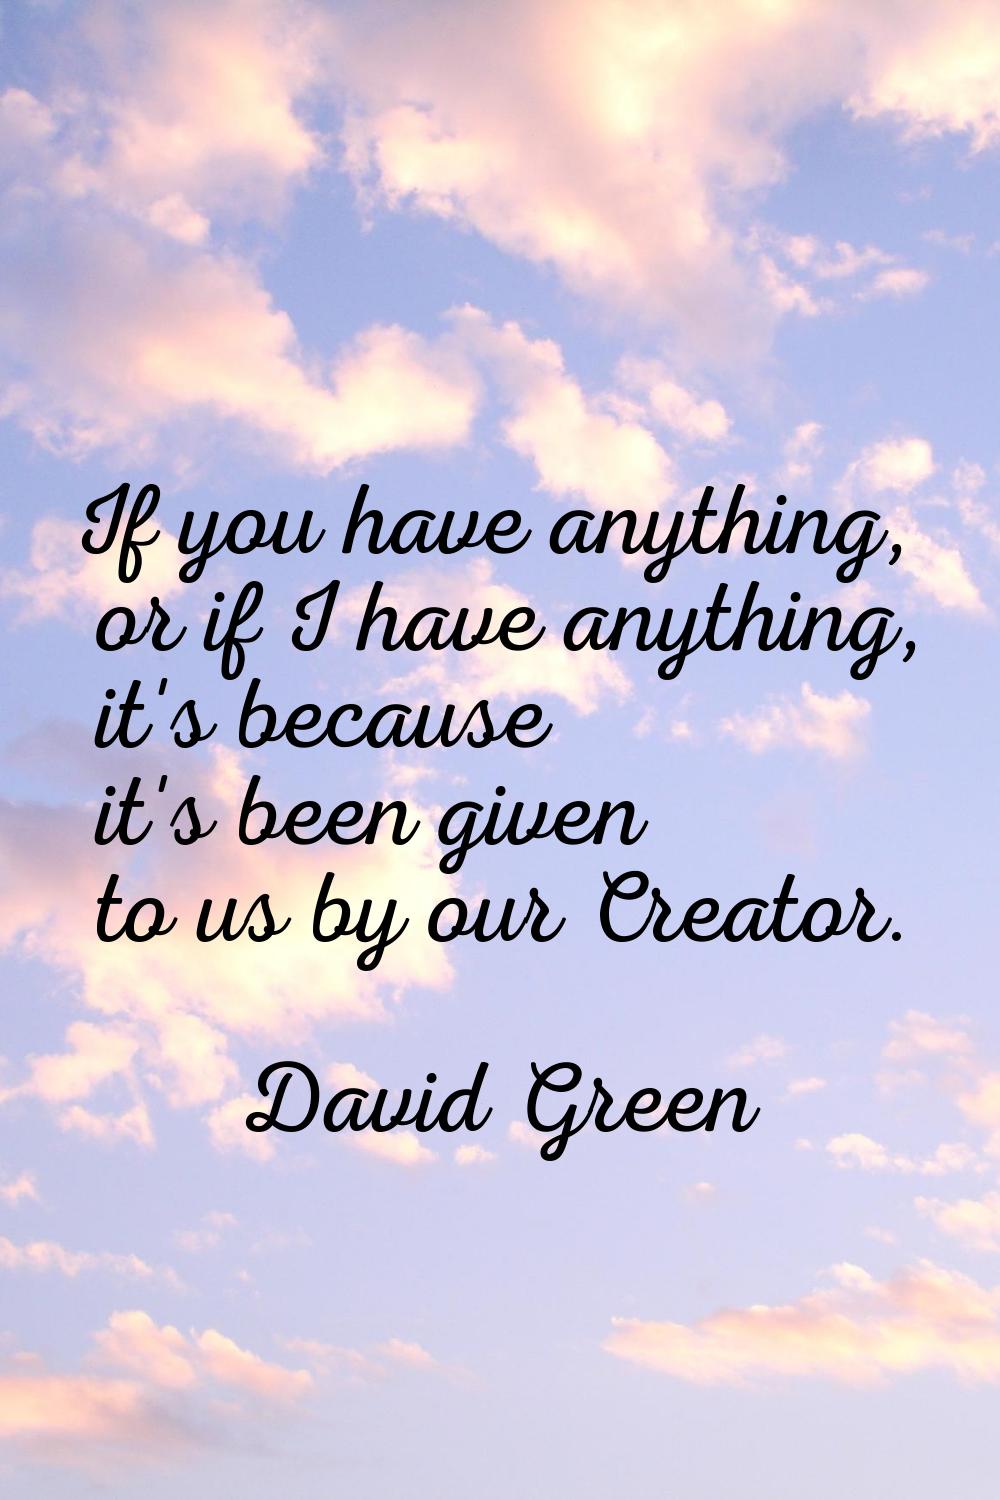 If you have anything, or if I have anything, it's because it's been given to us by our Creator.